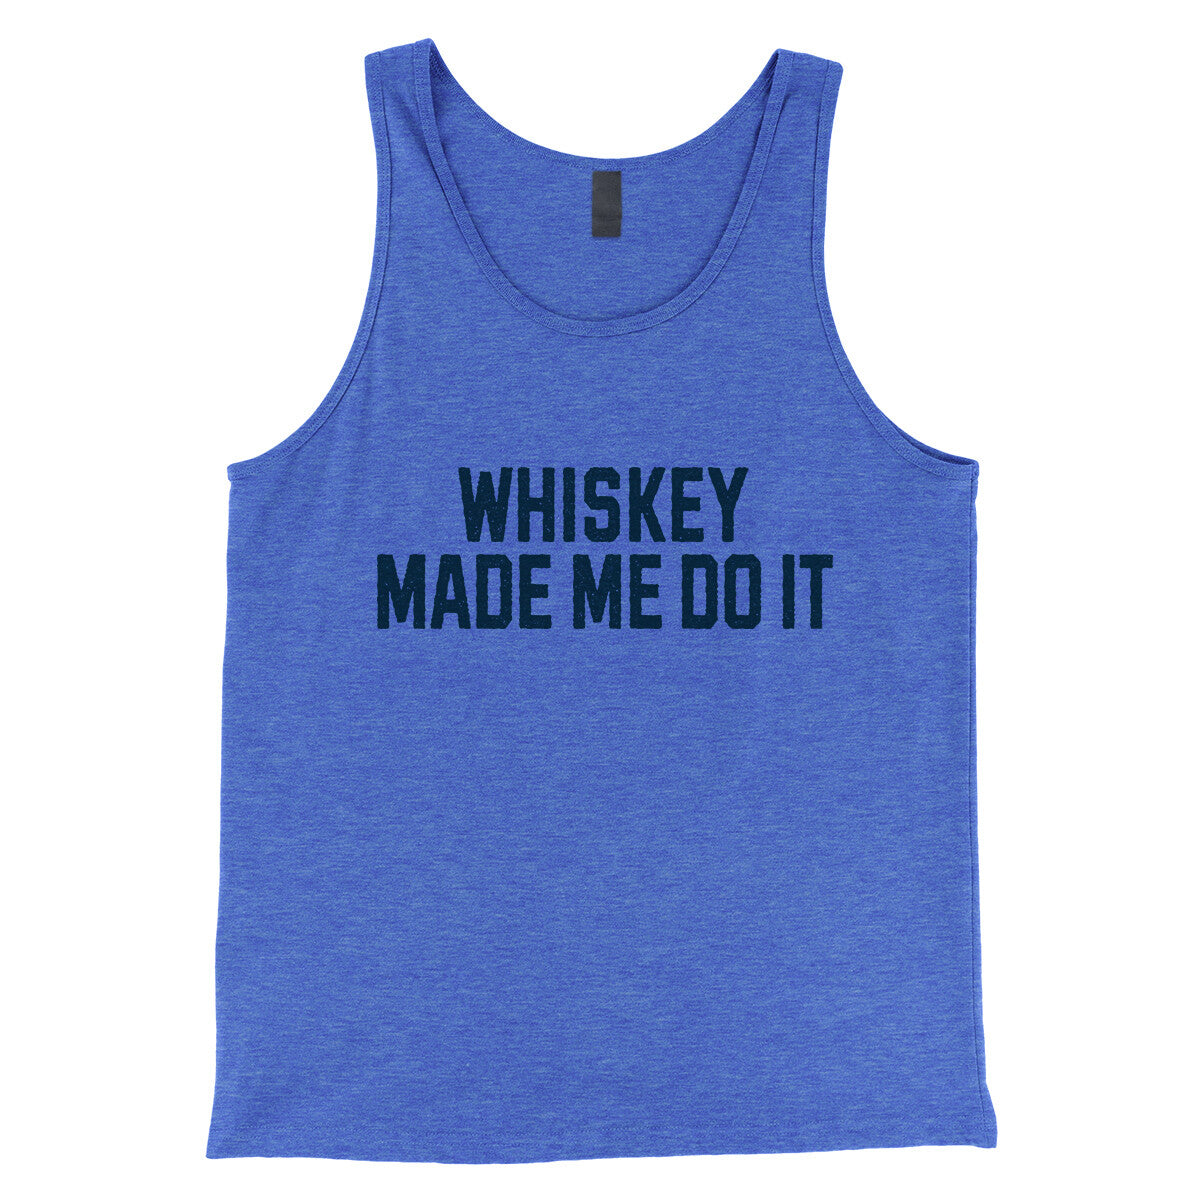 Whiskey Made Me Do It in True Royal TriBlend Color